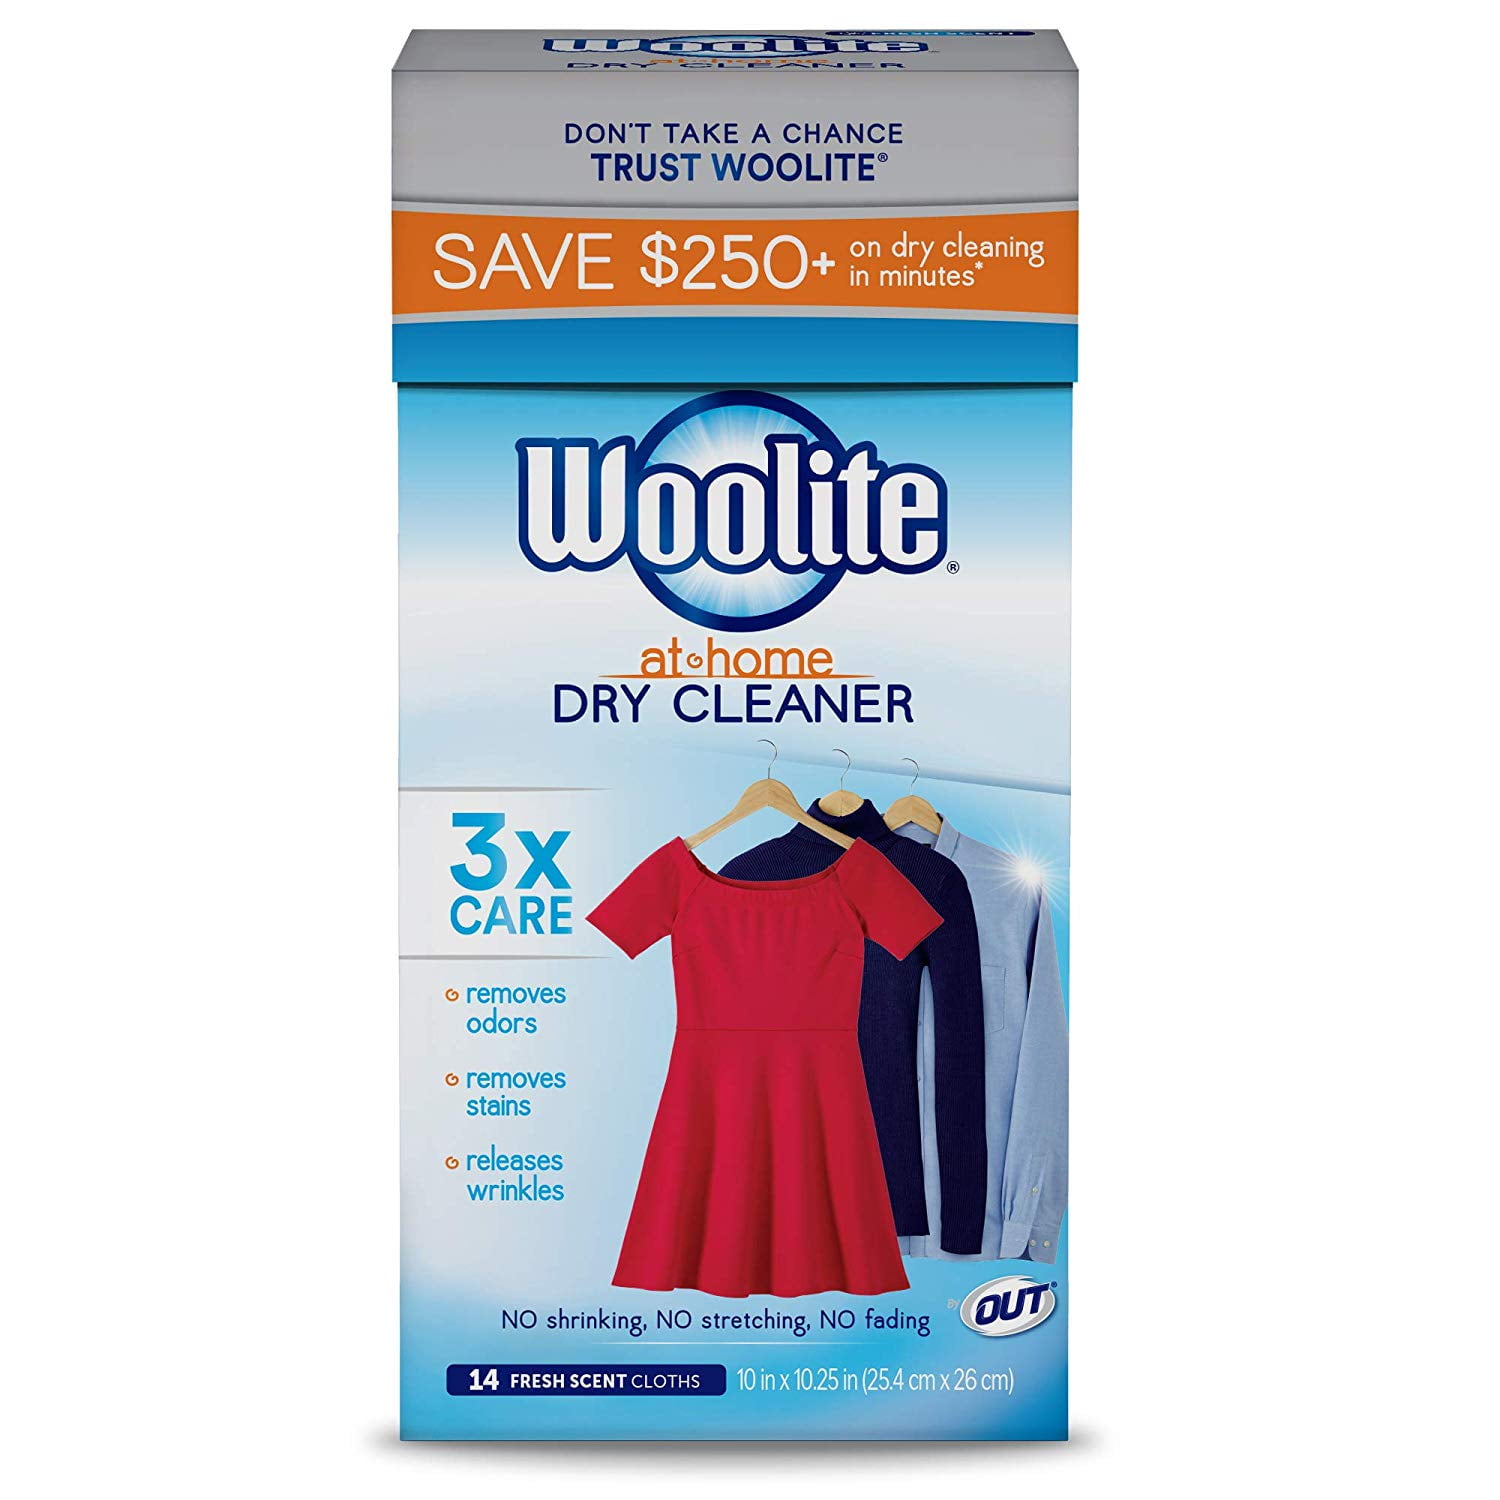 Woolite® Dry Care, Fresh Scent